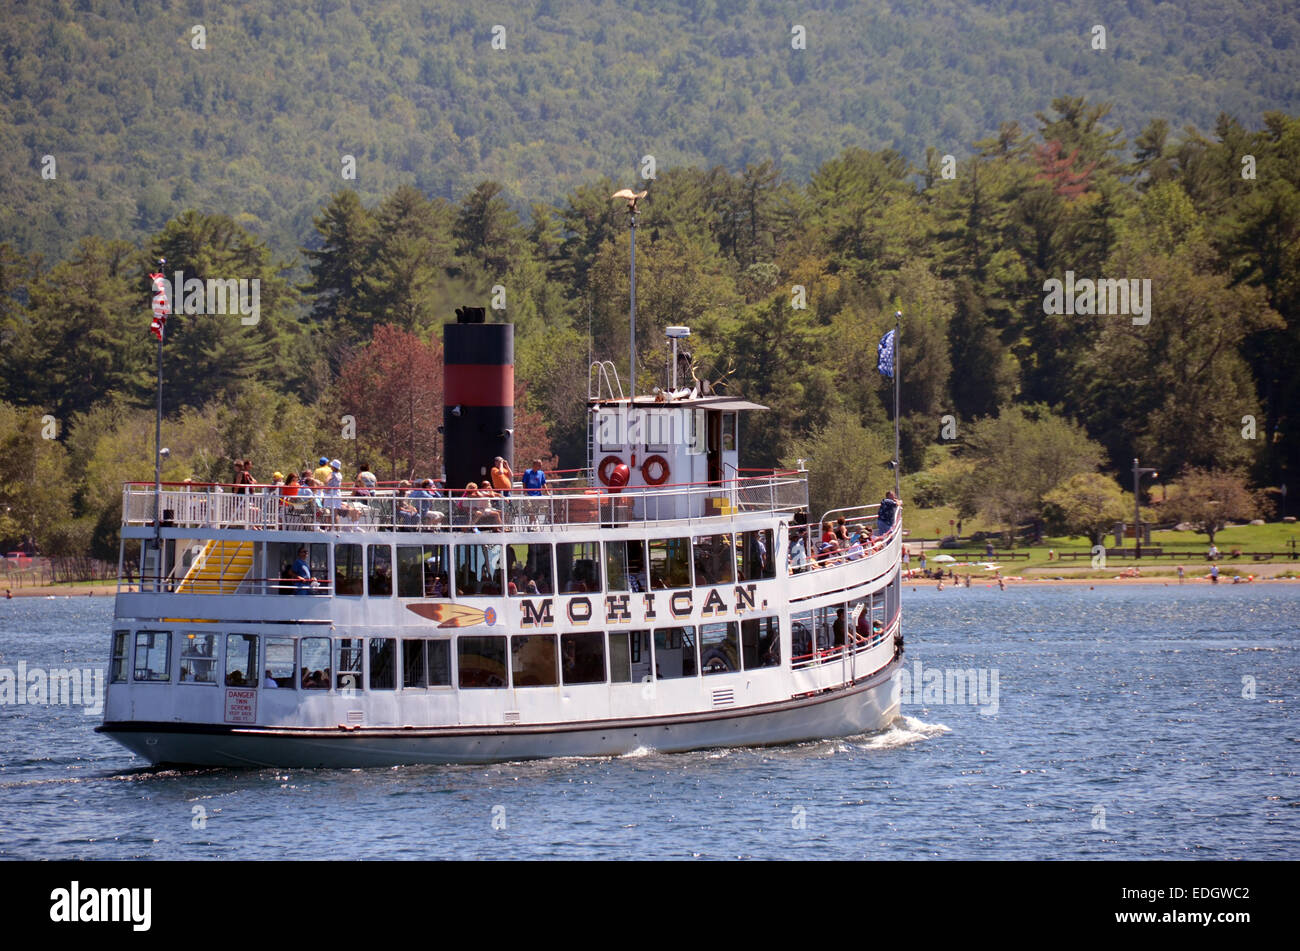 Lake George, USA - August 7, 2012: Tourists enjoy sightseeing along the shores of Lake George, new York State on August 7, 2012. Stock Photo